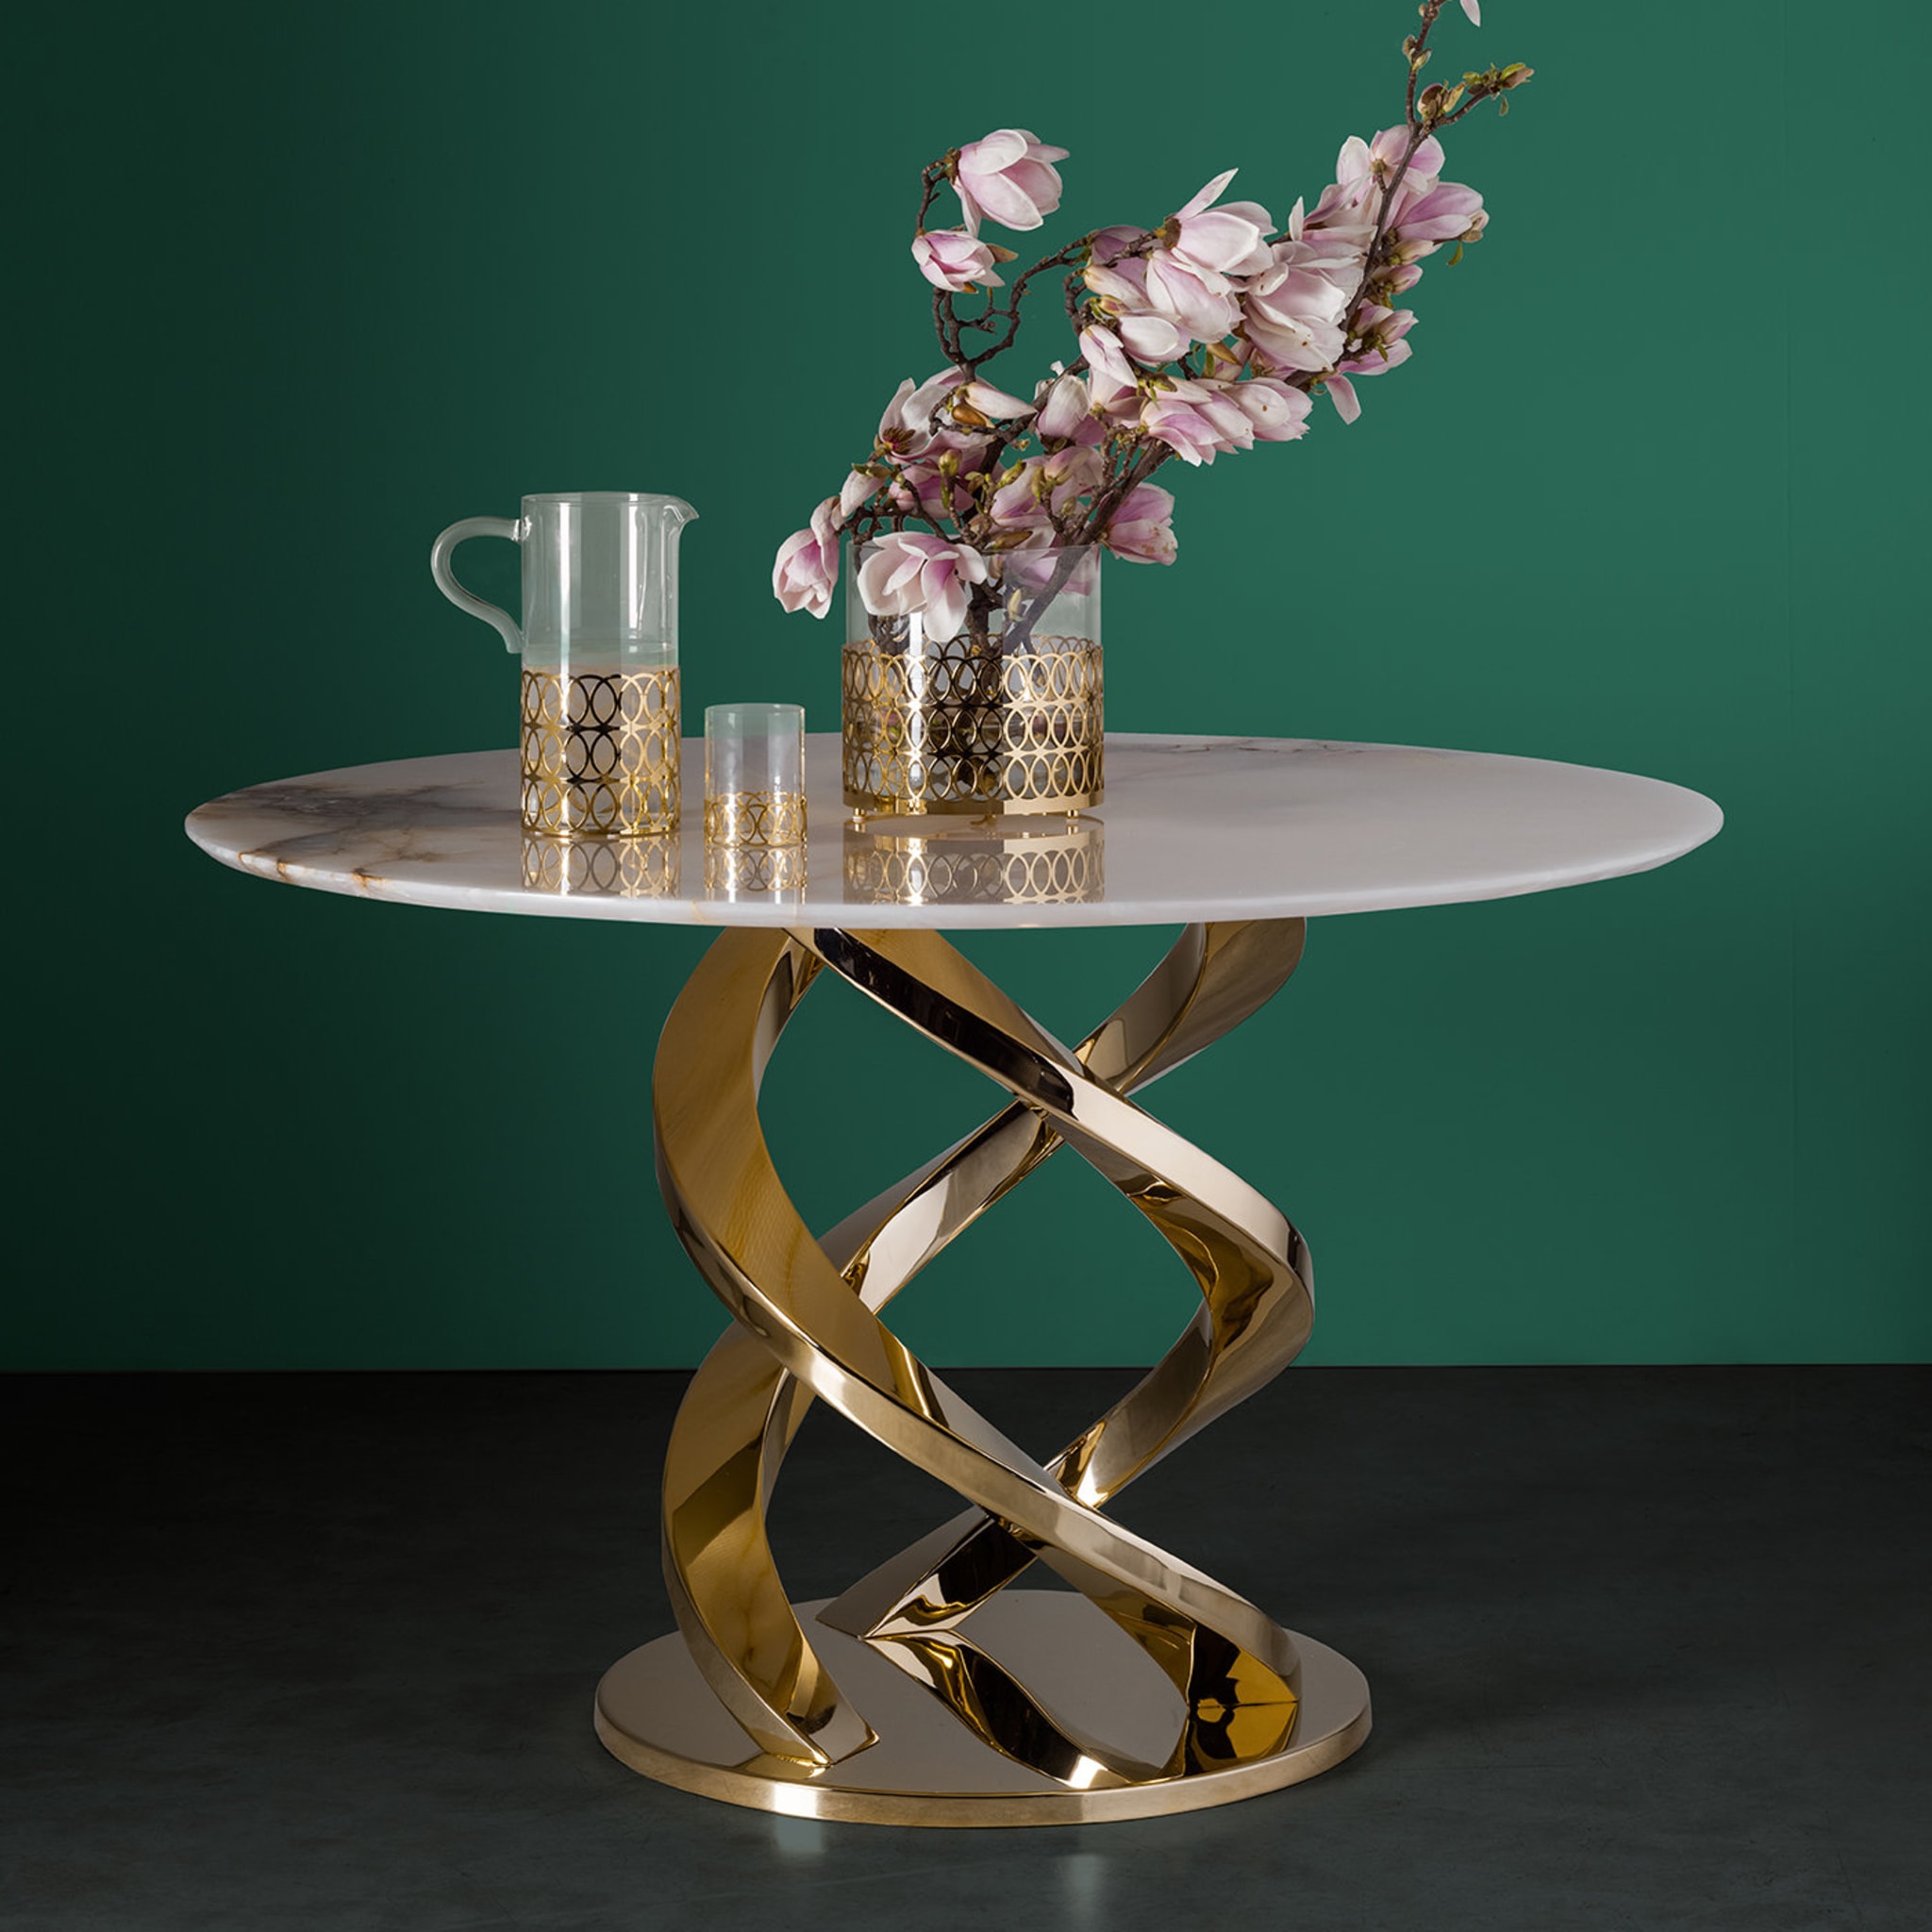 Cerberus Dining Table with Onyx Gold Marble Top - Alternative view 1